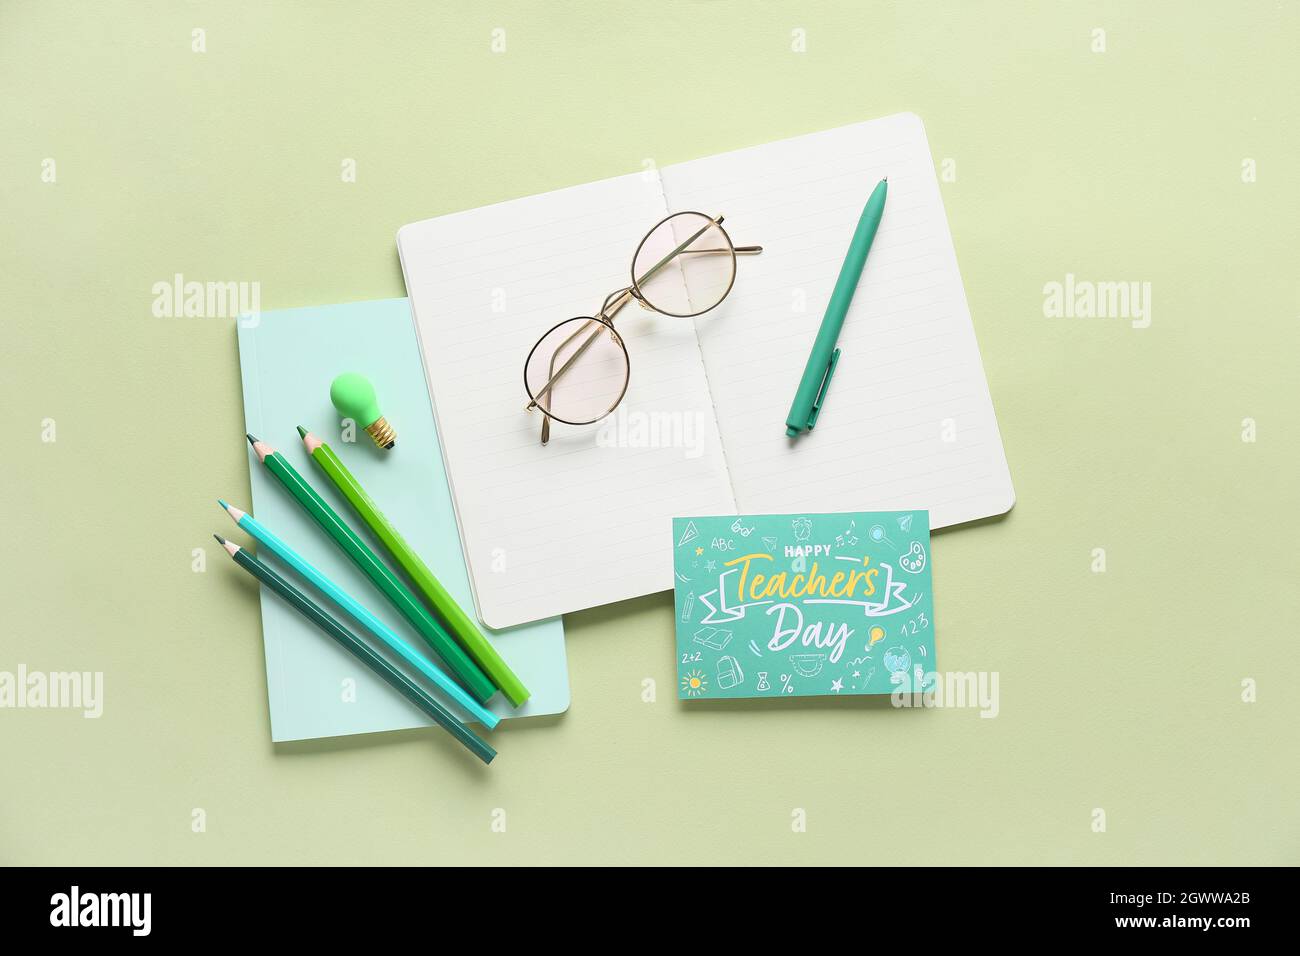 Teacher's Day concept. School supplies and greeting card on pink